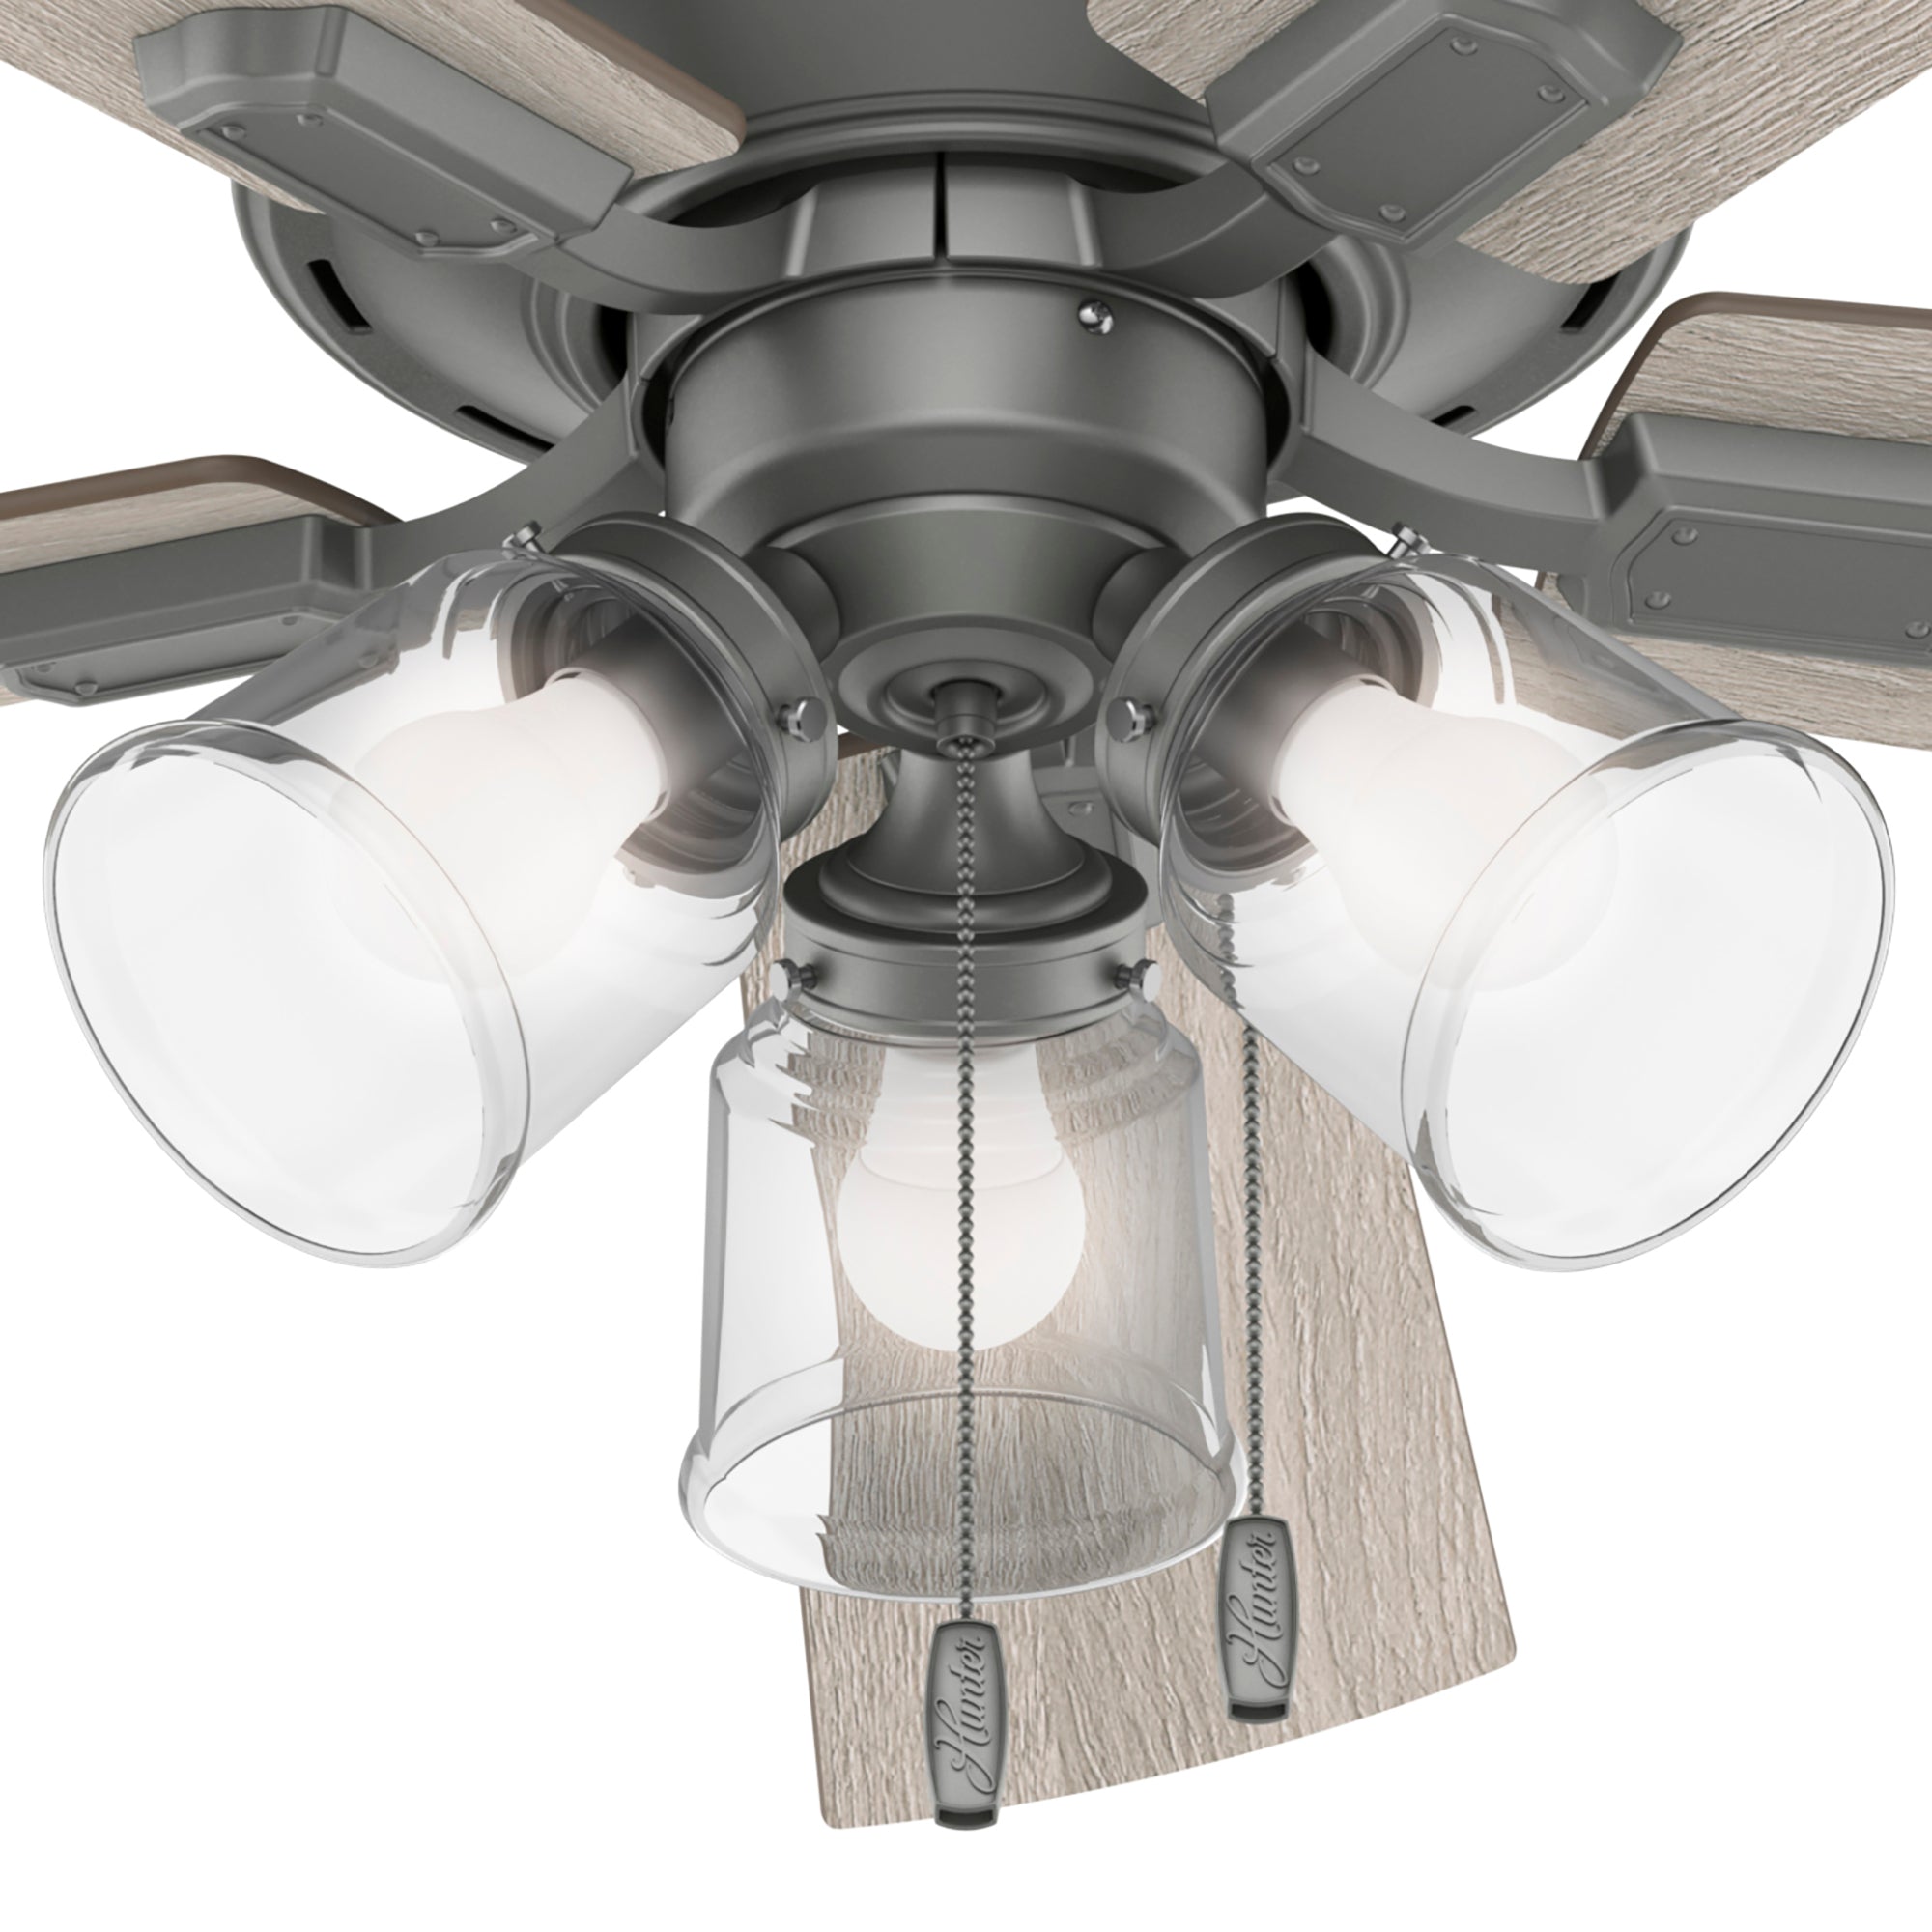 Hunter 52 inch Crestfield Ceiling Fan with LED Light Kit and Pull Chain